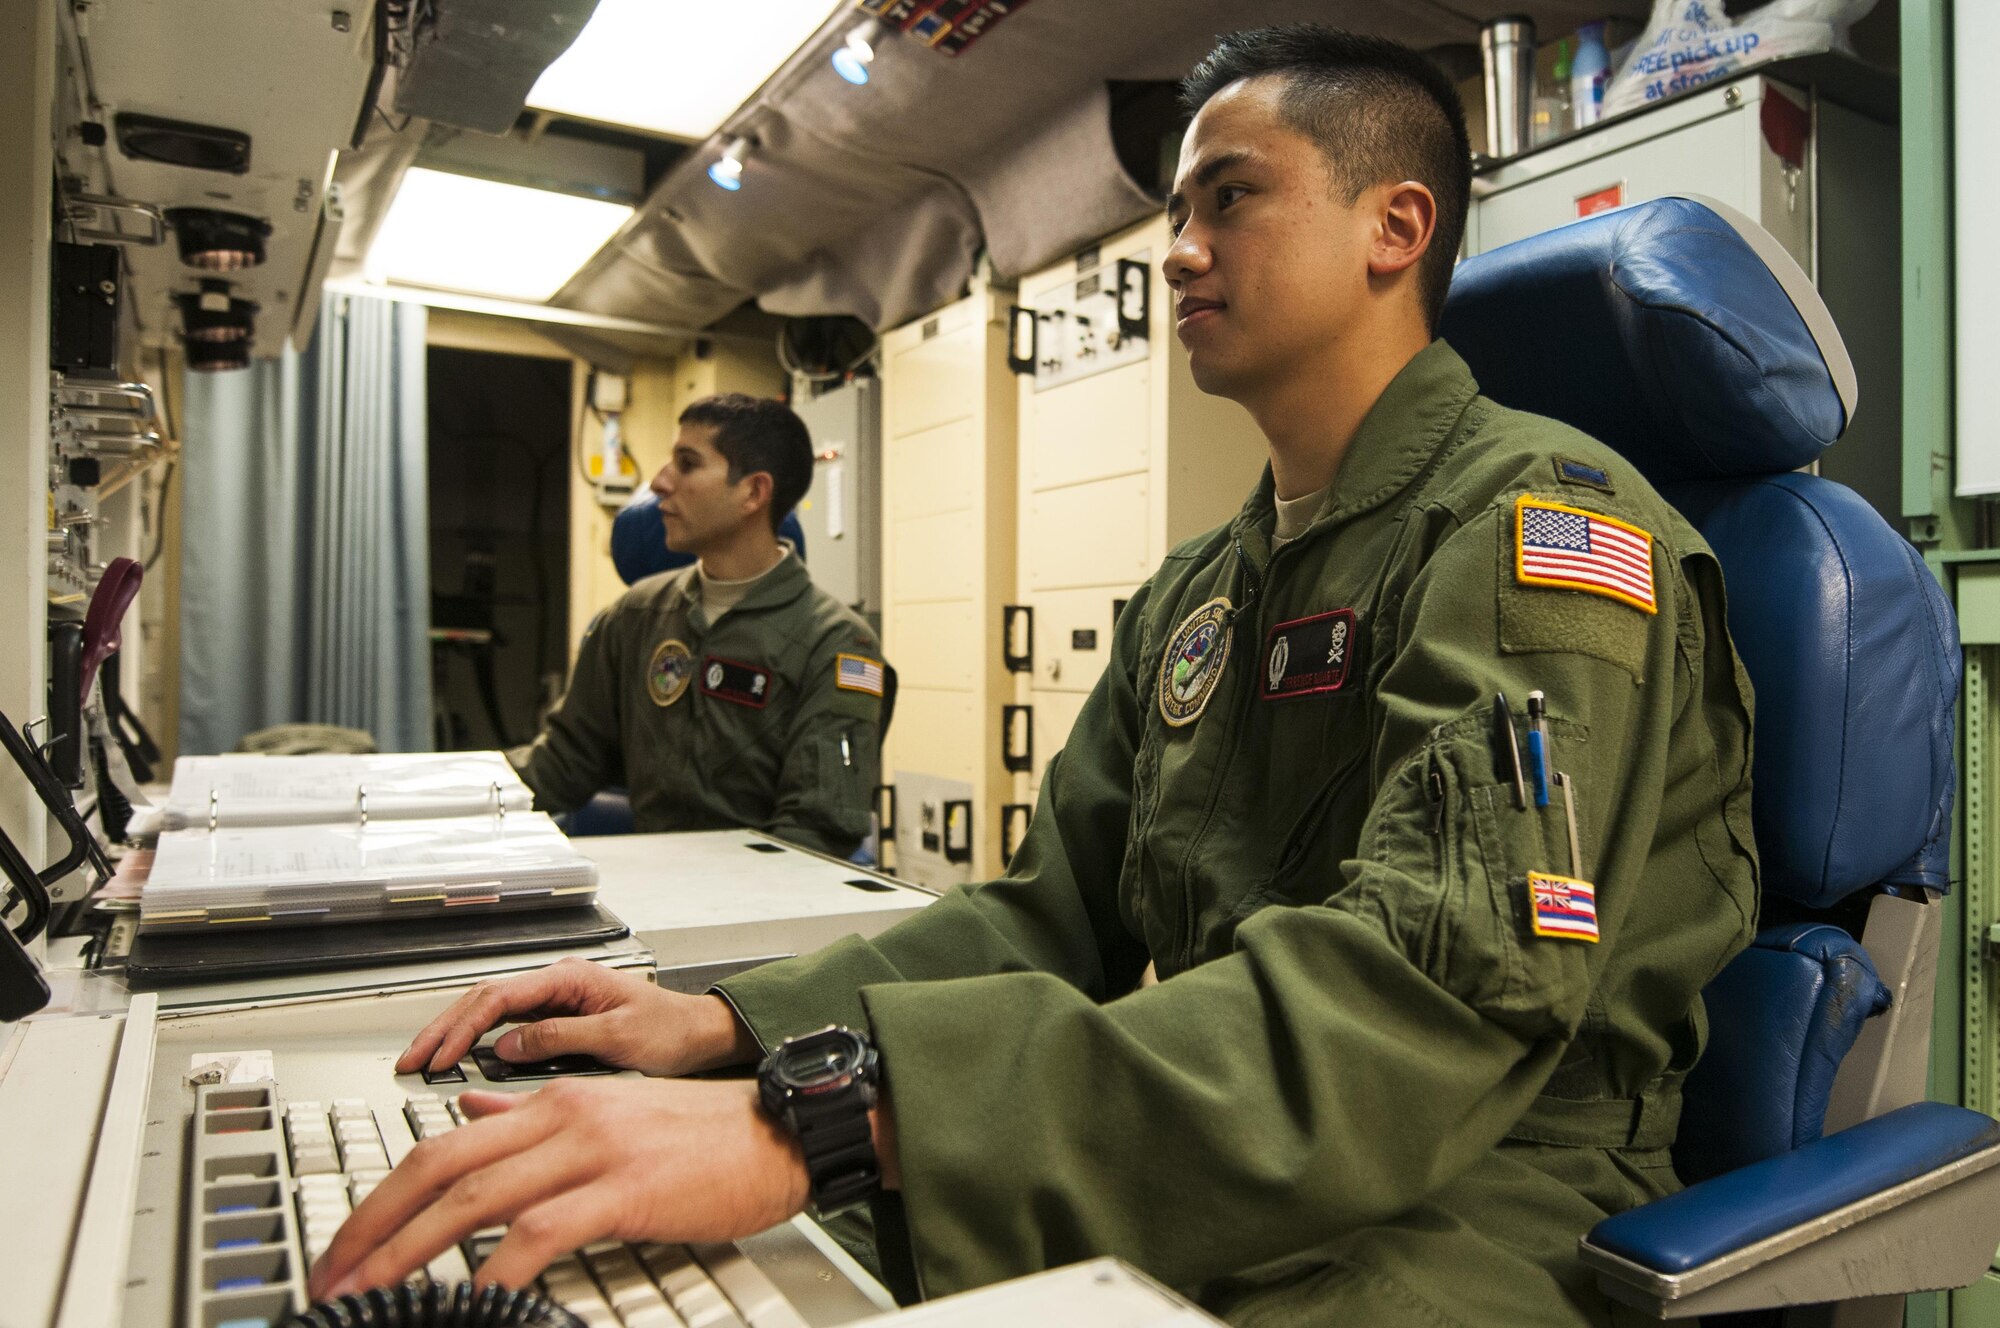 First Lt. Terrence Dale Duarte, 320th Missile Squadron missile combat crew commander and 2nd Lt. Nikolas Ramos, deputy missile combat crew commander, sit at the control console inside the launch control center at F.E. Warren Air Force Base, Wyo., Nov. 5, 2016. When directed by the U.S. President, a properly conducted key turn sends a "launch vote" to any number of Minuteman III ICBMs in a missileer's squadron, two different launch votes are required to enable a launch. (U.S. Air Force photo by Staff Sgt. Christopher Ruano)